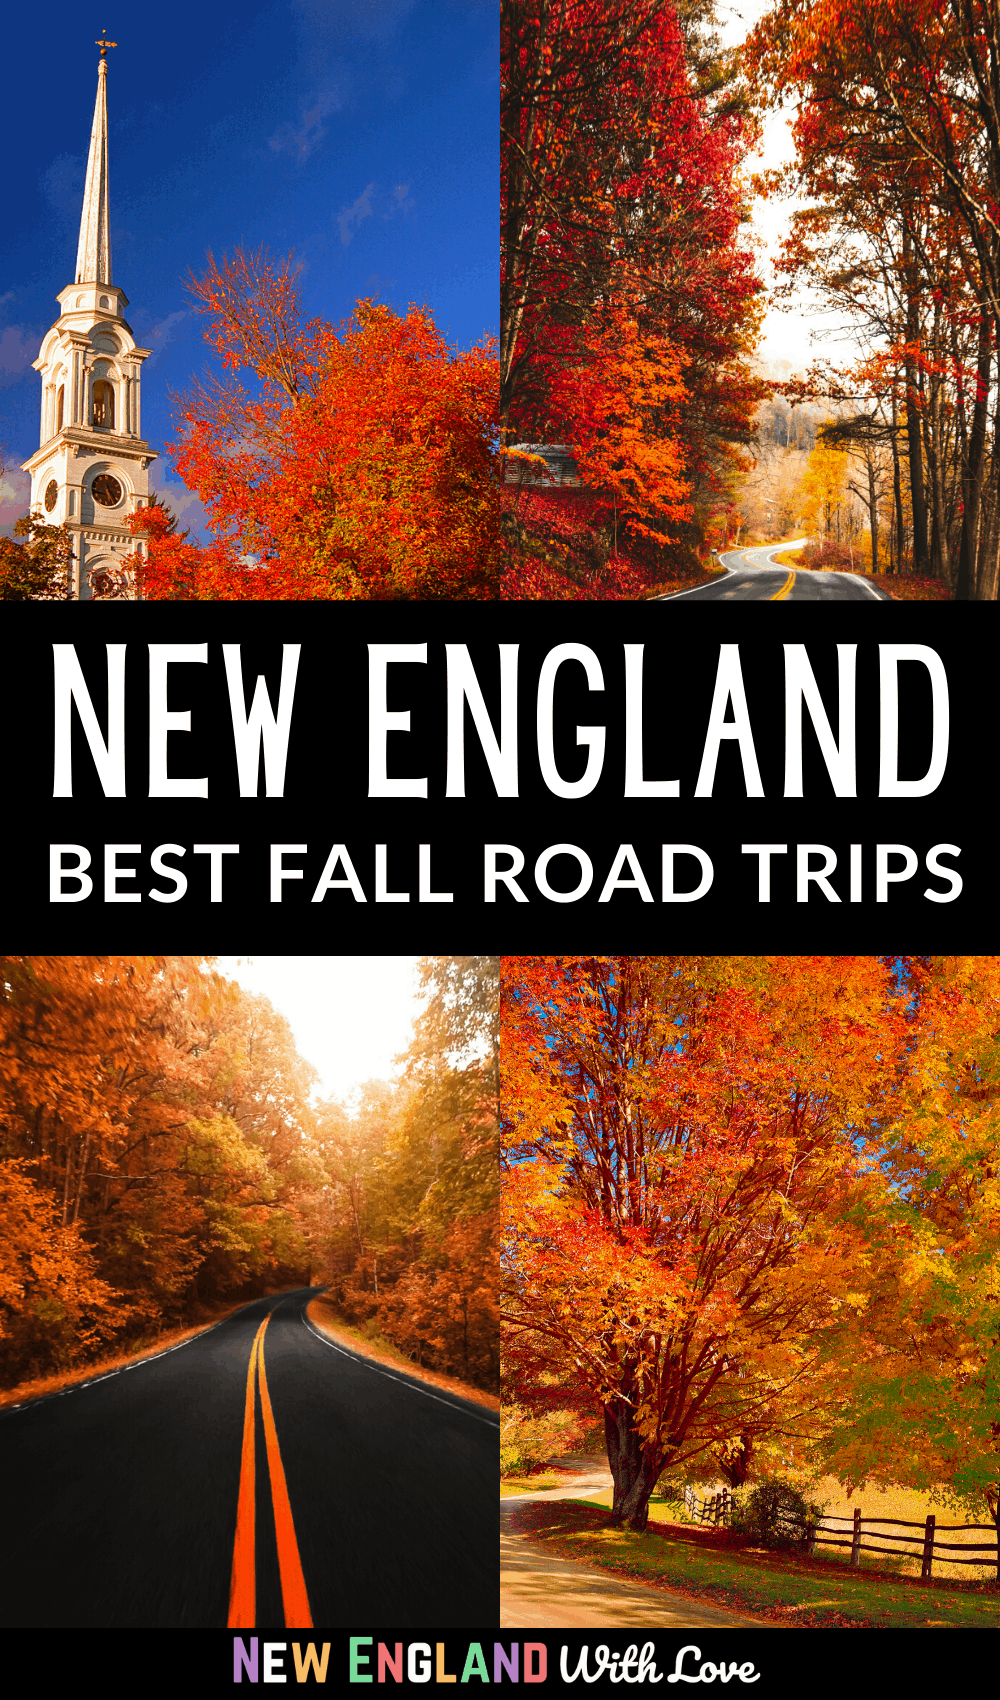 Pinterest graphic reading "NEW ENGLAND BEST FALL ROAD TRIPS"